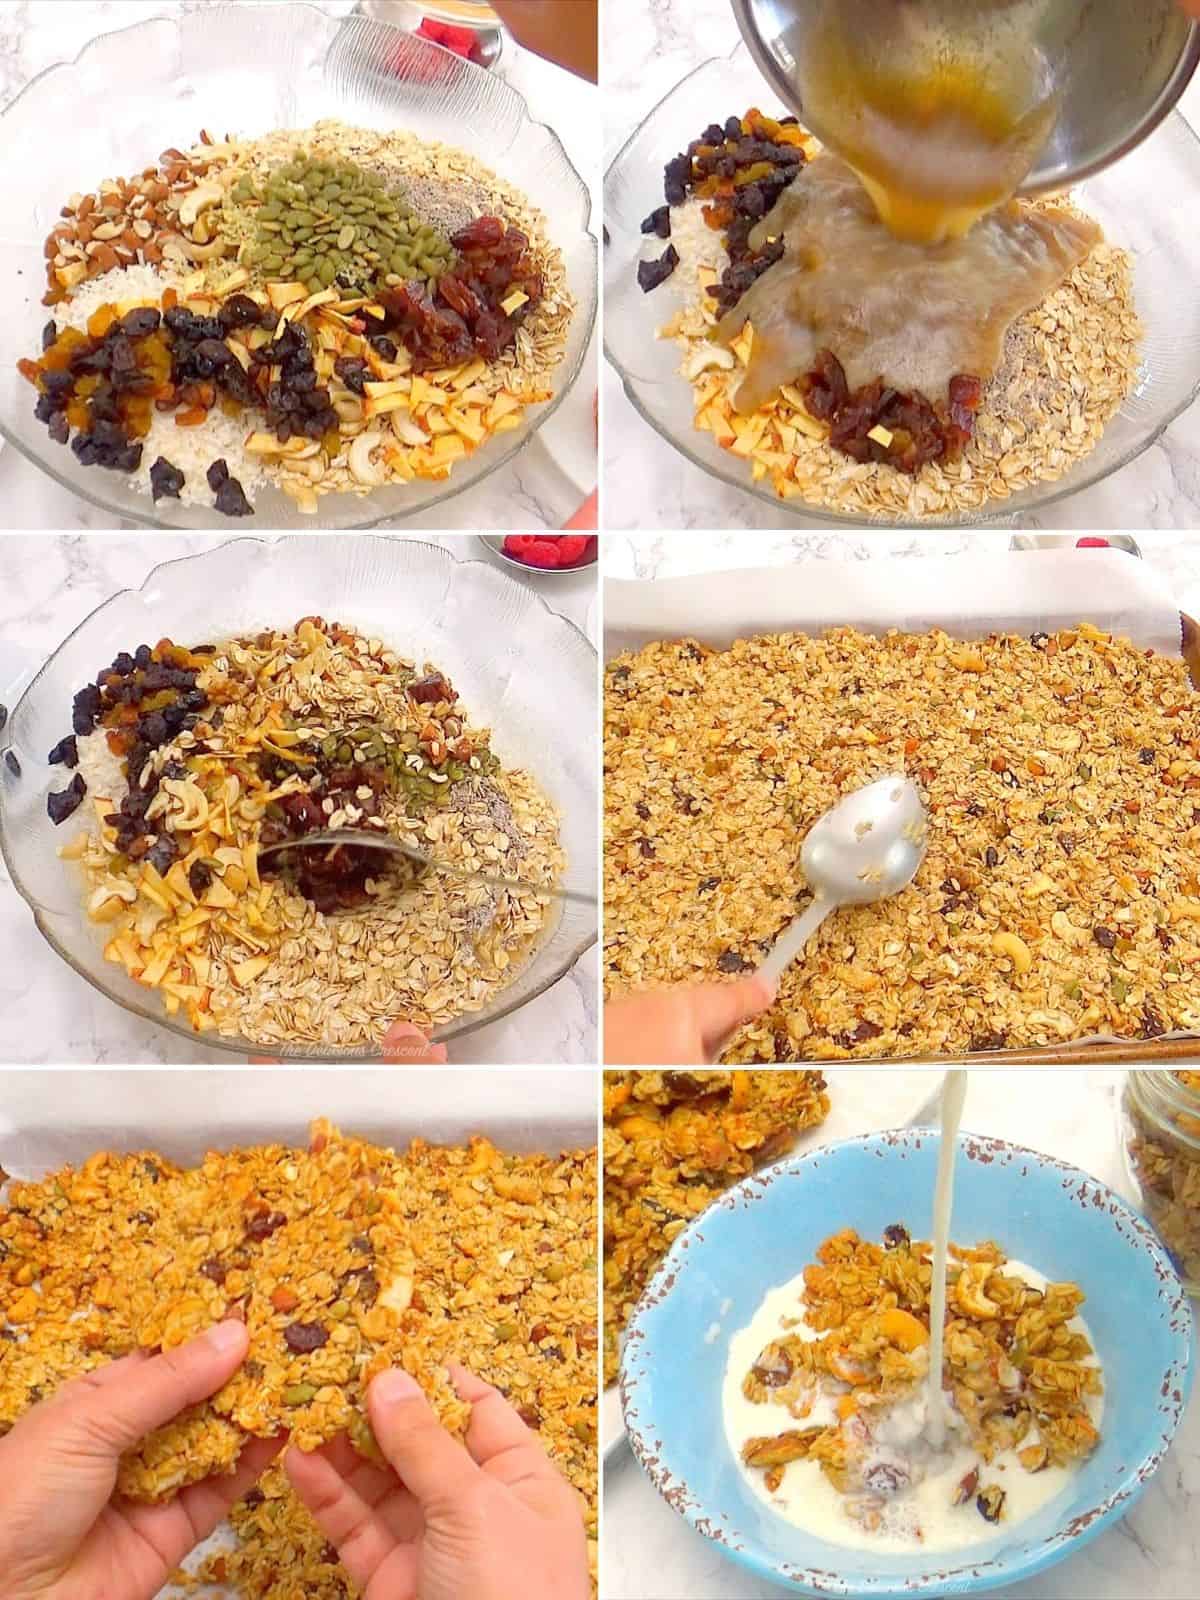 Step by step preparation of granola with cashews and cardamom.